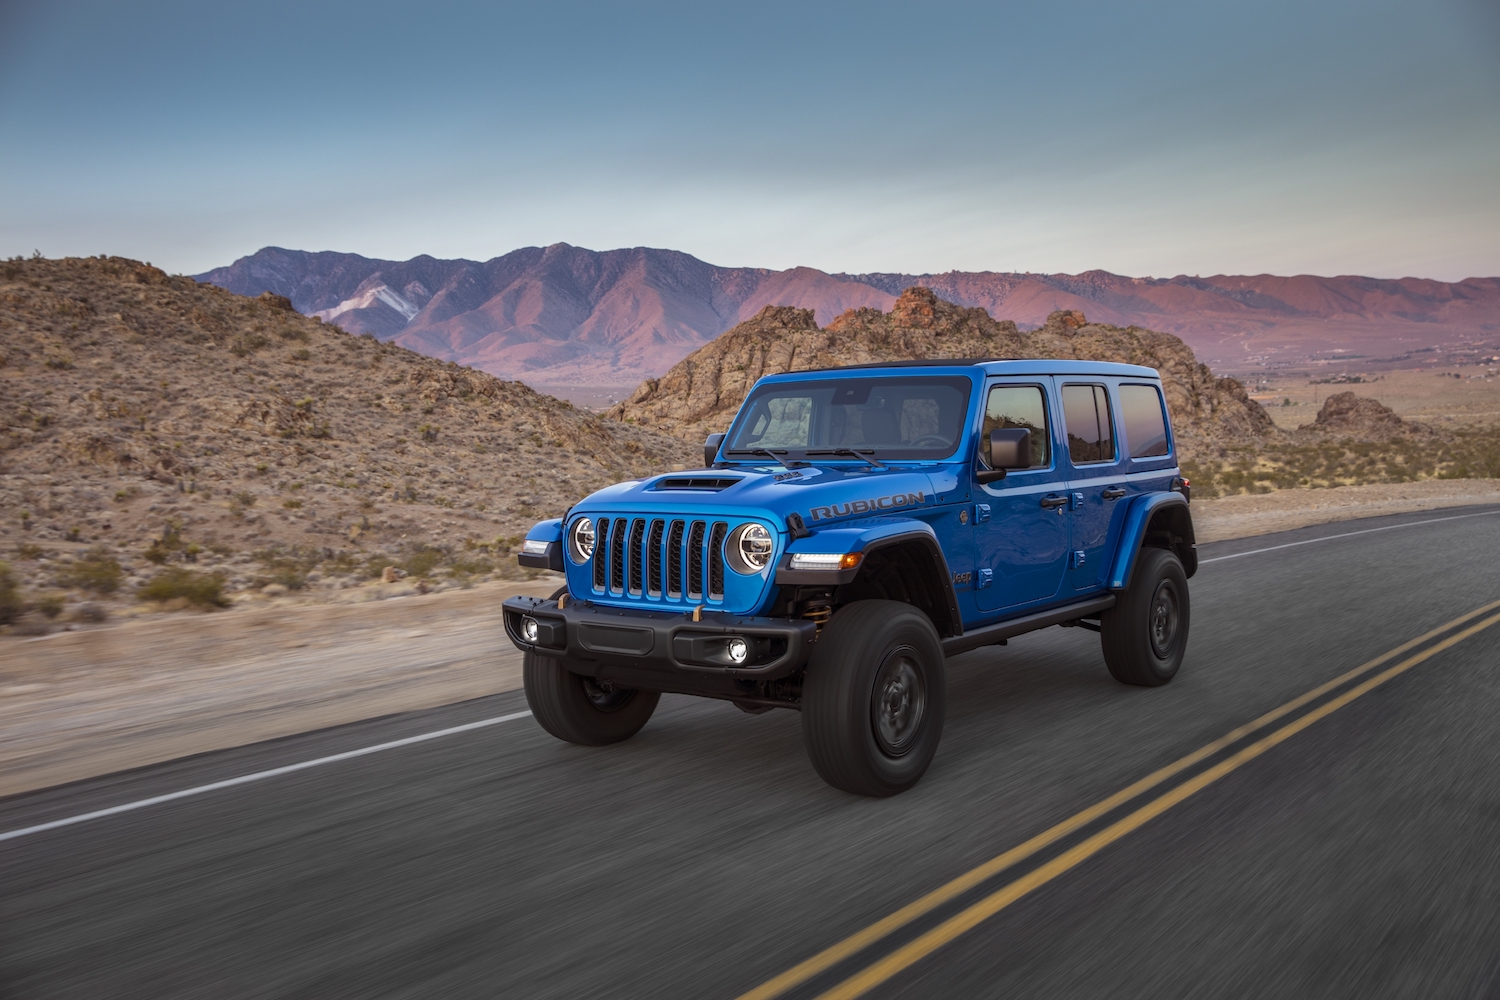 2021 Jeep Wrangler driving with a mountain range in the background